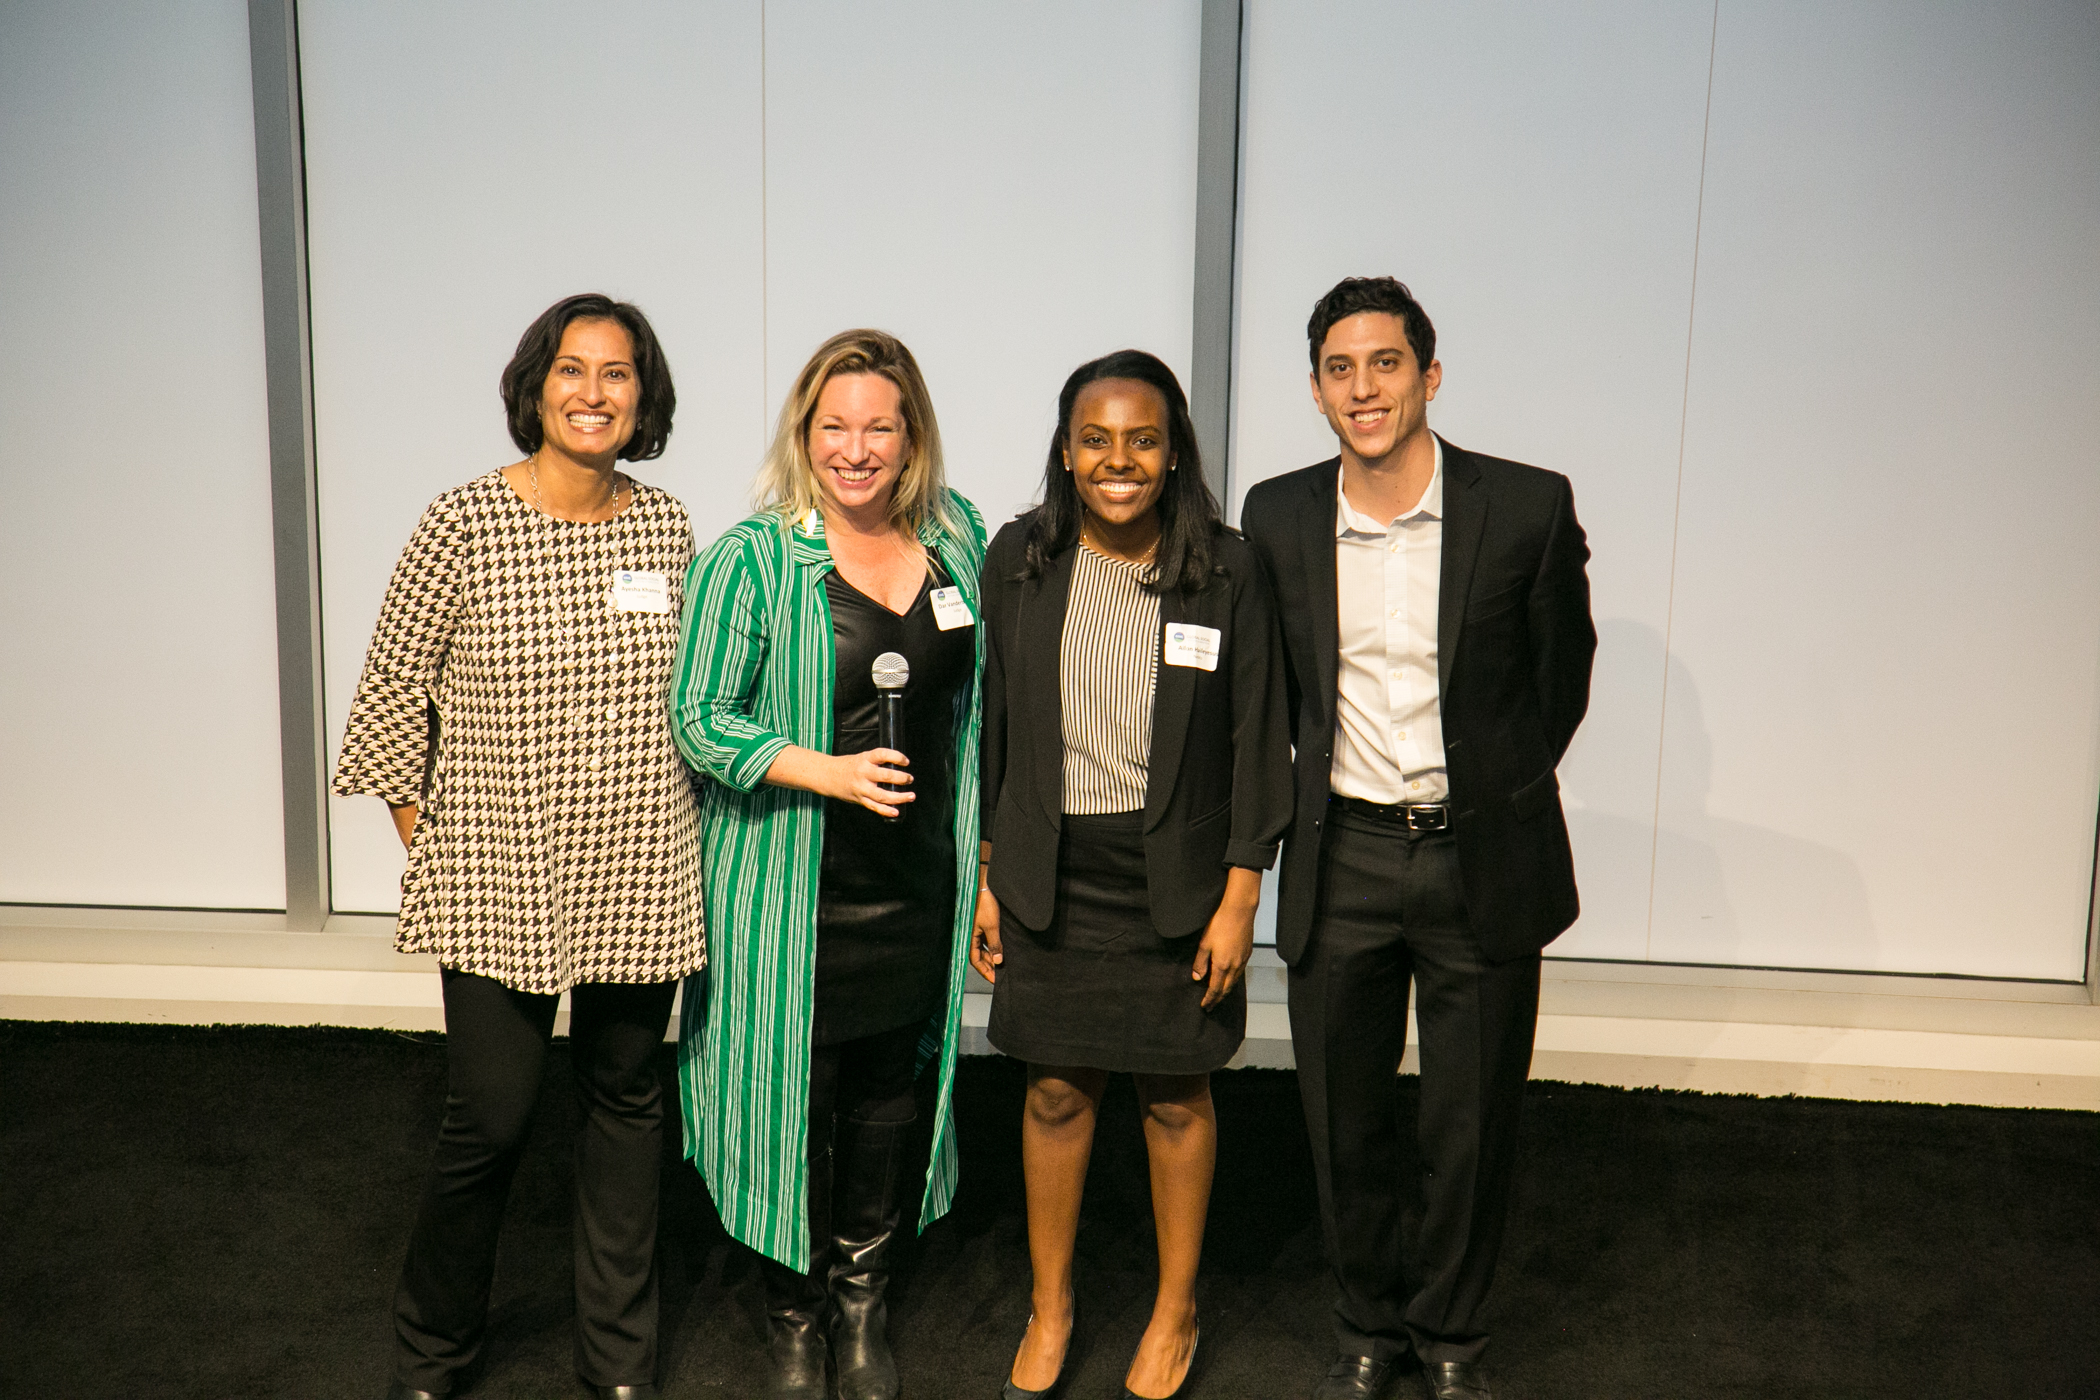 Global Finalist team, NeMo (Johns Hopkins), on stage with judges Ayesha Khanna (Points of Light) and Dar Vanderbeck (CARE)